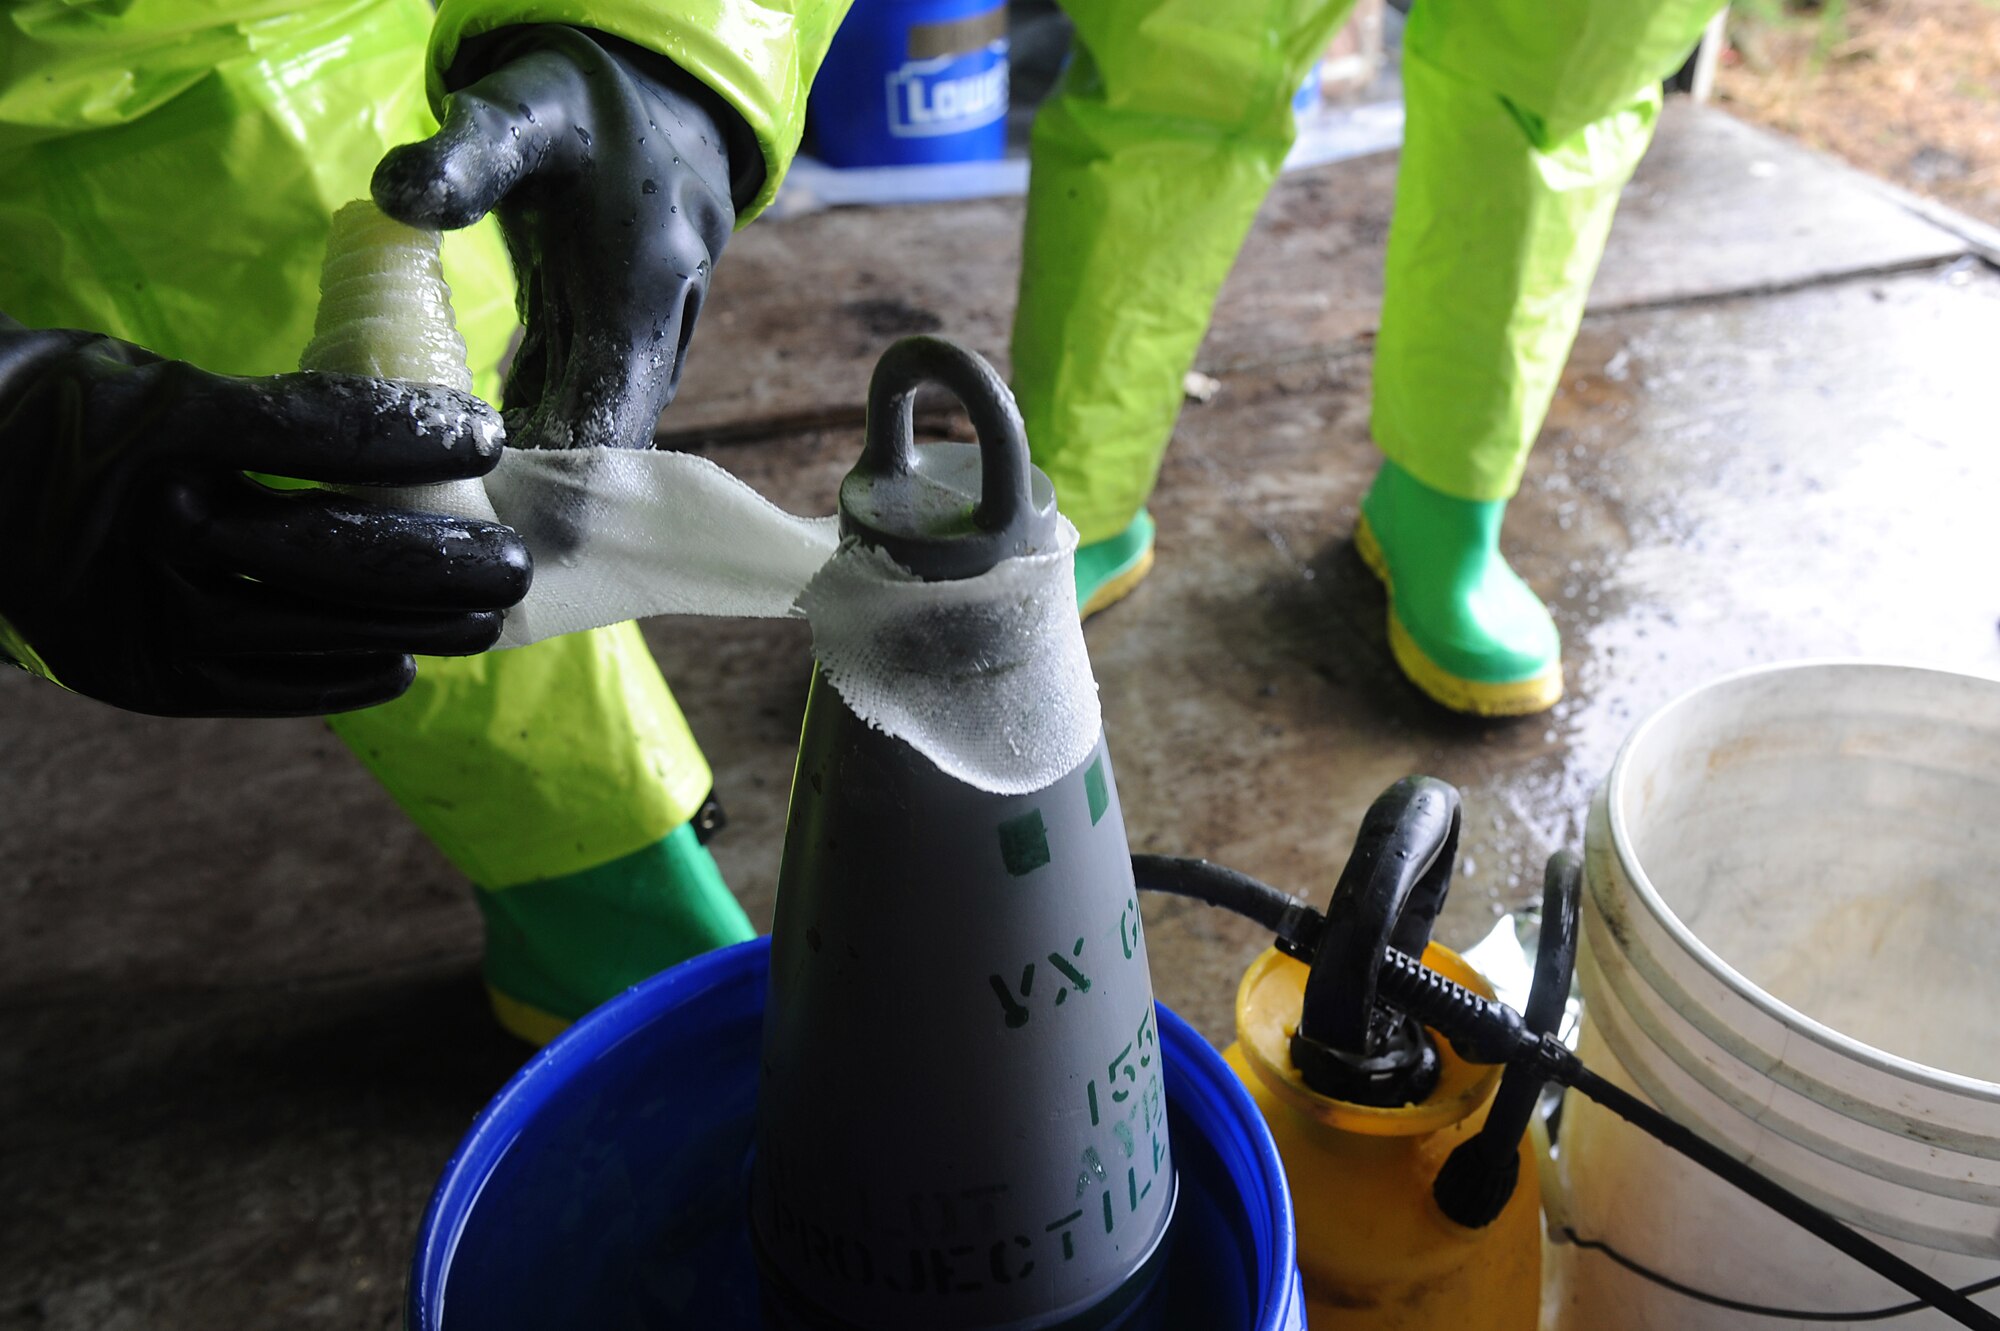 U.S. Air Force Explosives Ordinance Disposal Airmen participate in a simulated unexploded ordnance evaluation training during Operation Llama Fury 3.0 at Joint Base Langley-Eustis, Va., Aug. 8, 2017. Each team was evaluated by a subject matter expert from a different base, so that the training would be unbiased. (U.S. Air Force photo/Staff Sgt. Brittany E. N. Murphy)